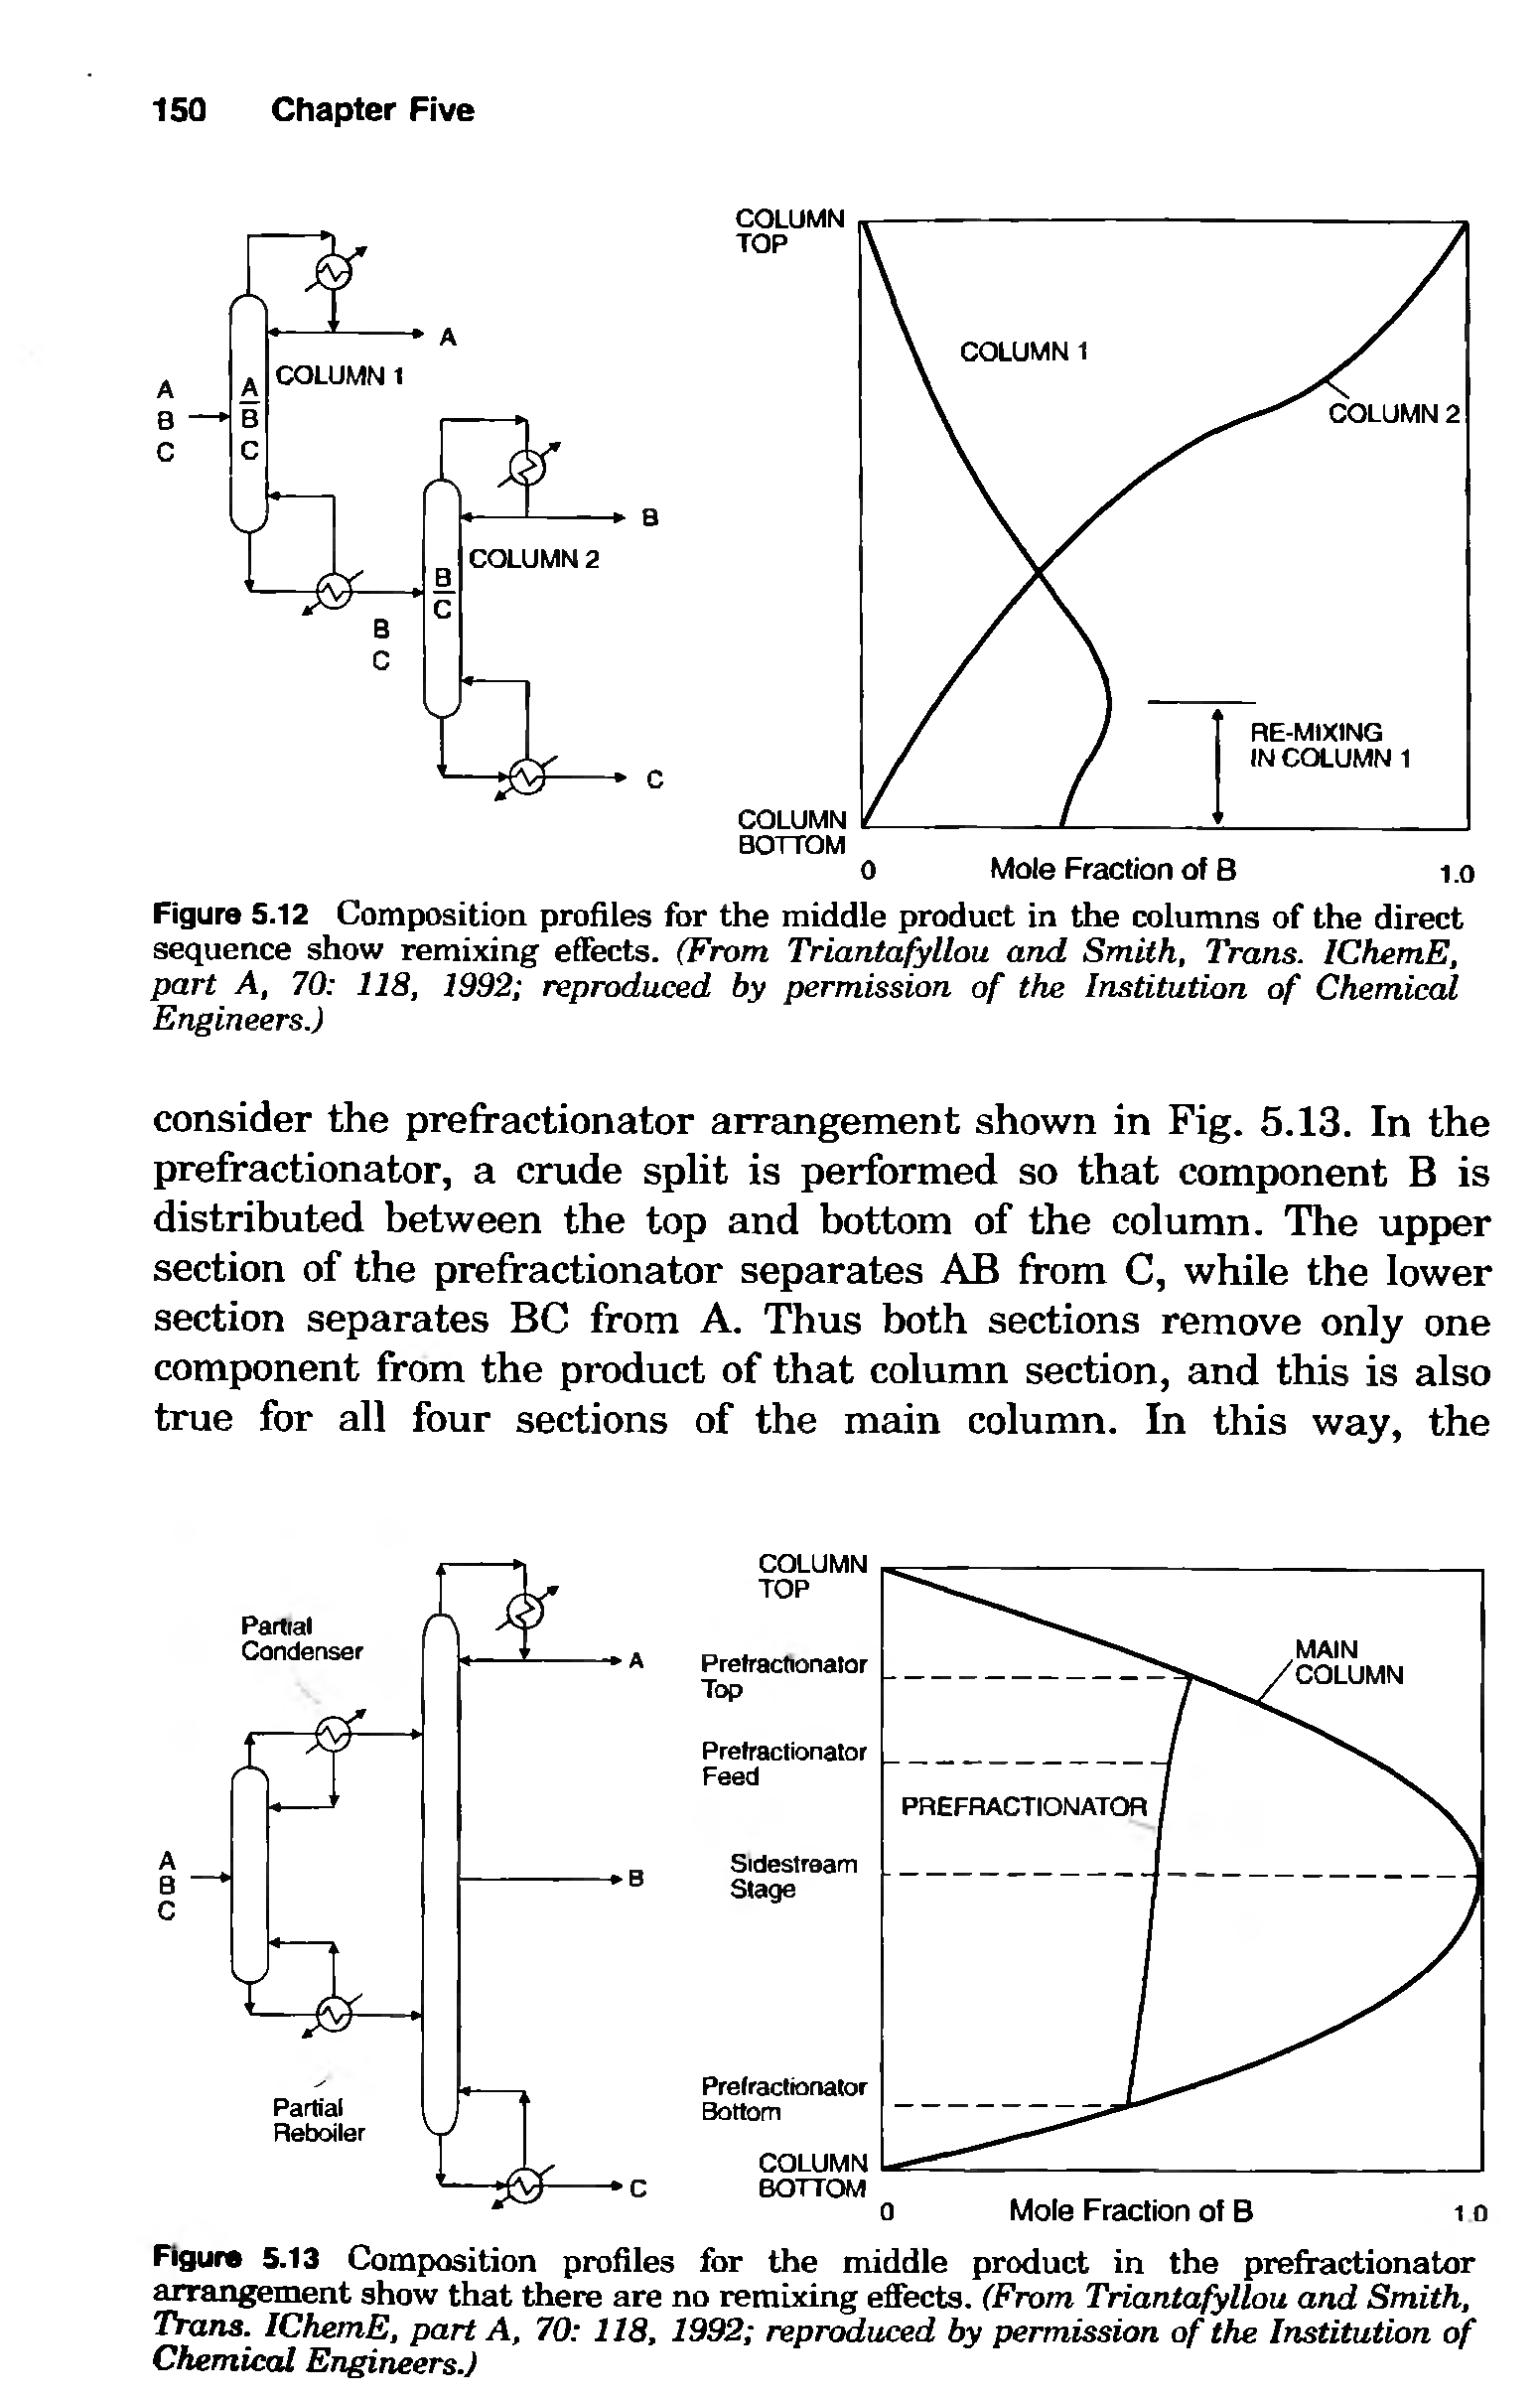 Figure 5.13 Compasition profiles for the middle product in the prefractionator arrangement show that there are no remixing effects. (From Triantafyllou and Smith, Trans. IChemE, part A, 70 118, 1992 repr uced by permission of the Institution of Chemical Engineers.)...